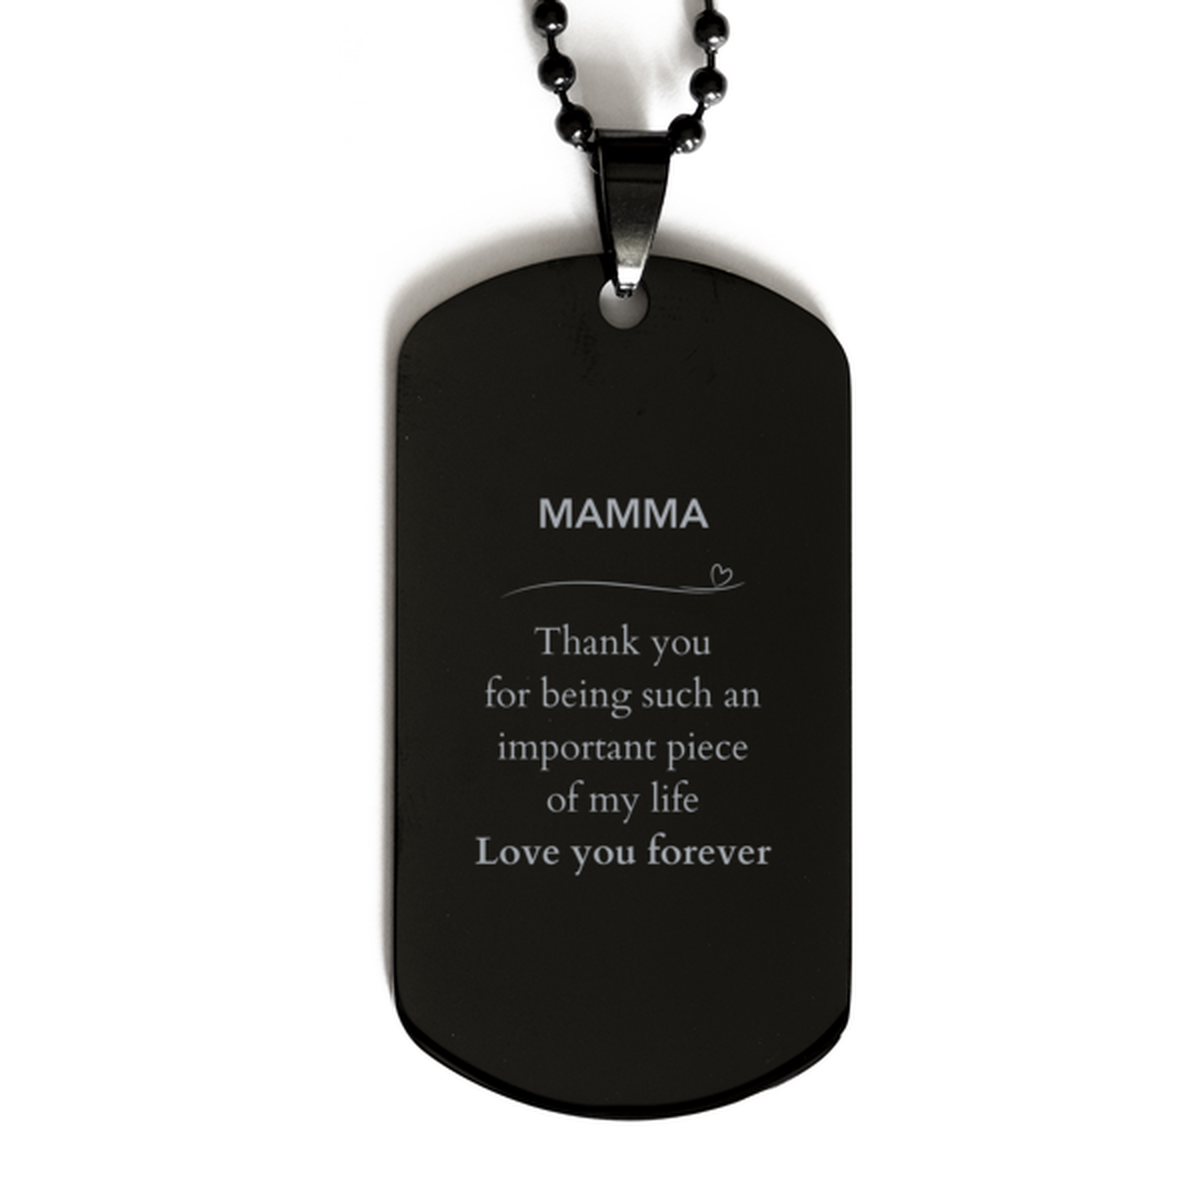 Appropriate Mamma Black Dog Tag Epic Birthday Gifts for Mamma Thank you for being such an important piece of my life Mamma Christmas Mothers Fathers Day